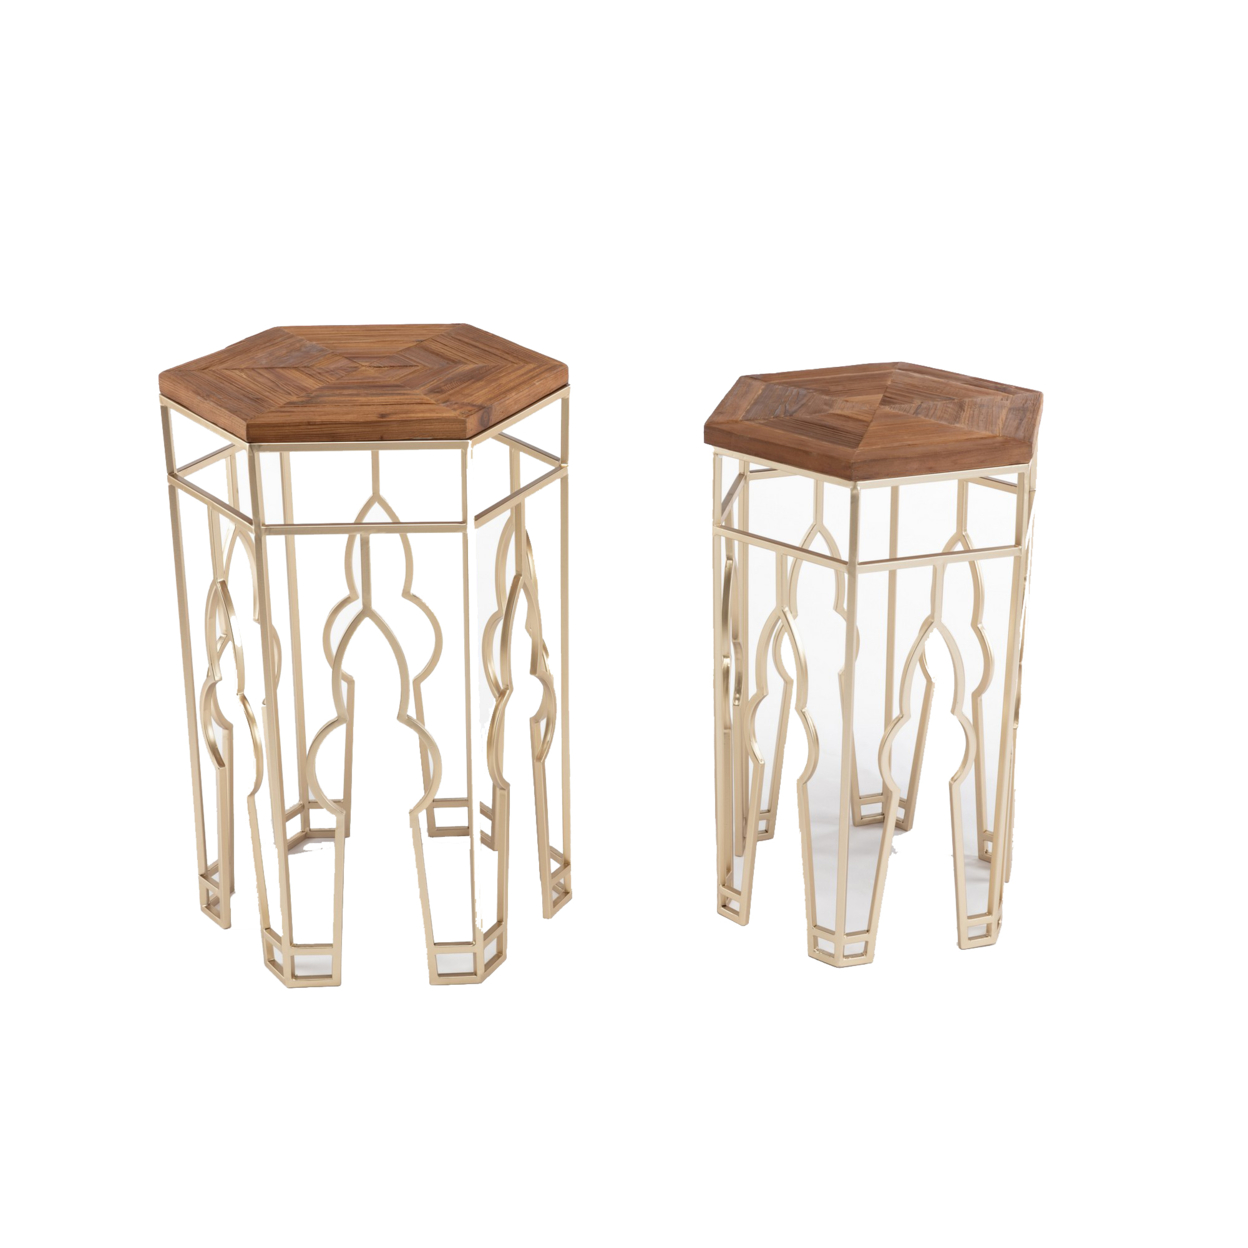 Nesting Side Table With Hexagonal Top, Set Of 2, Brown And Gold- Saltoro Sherpi